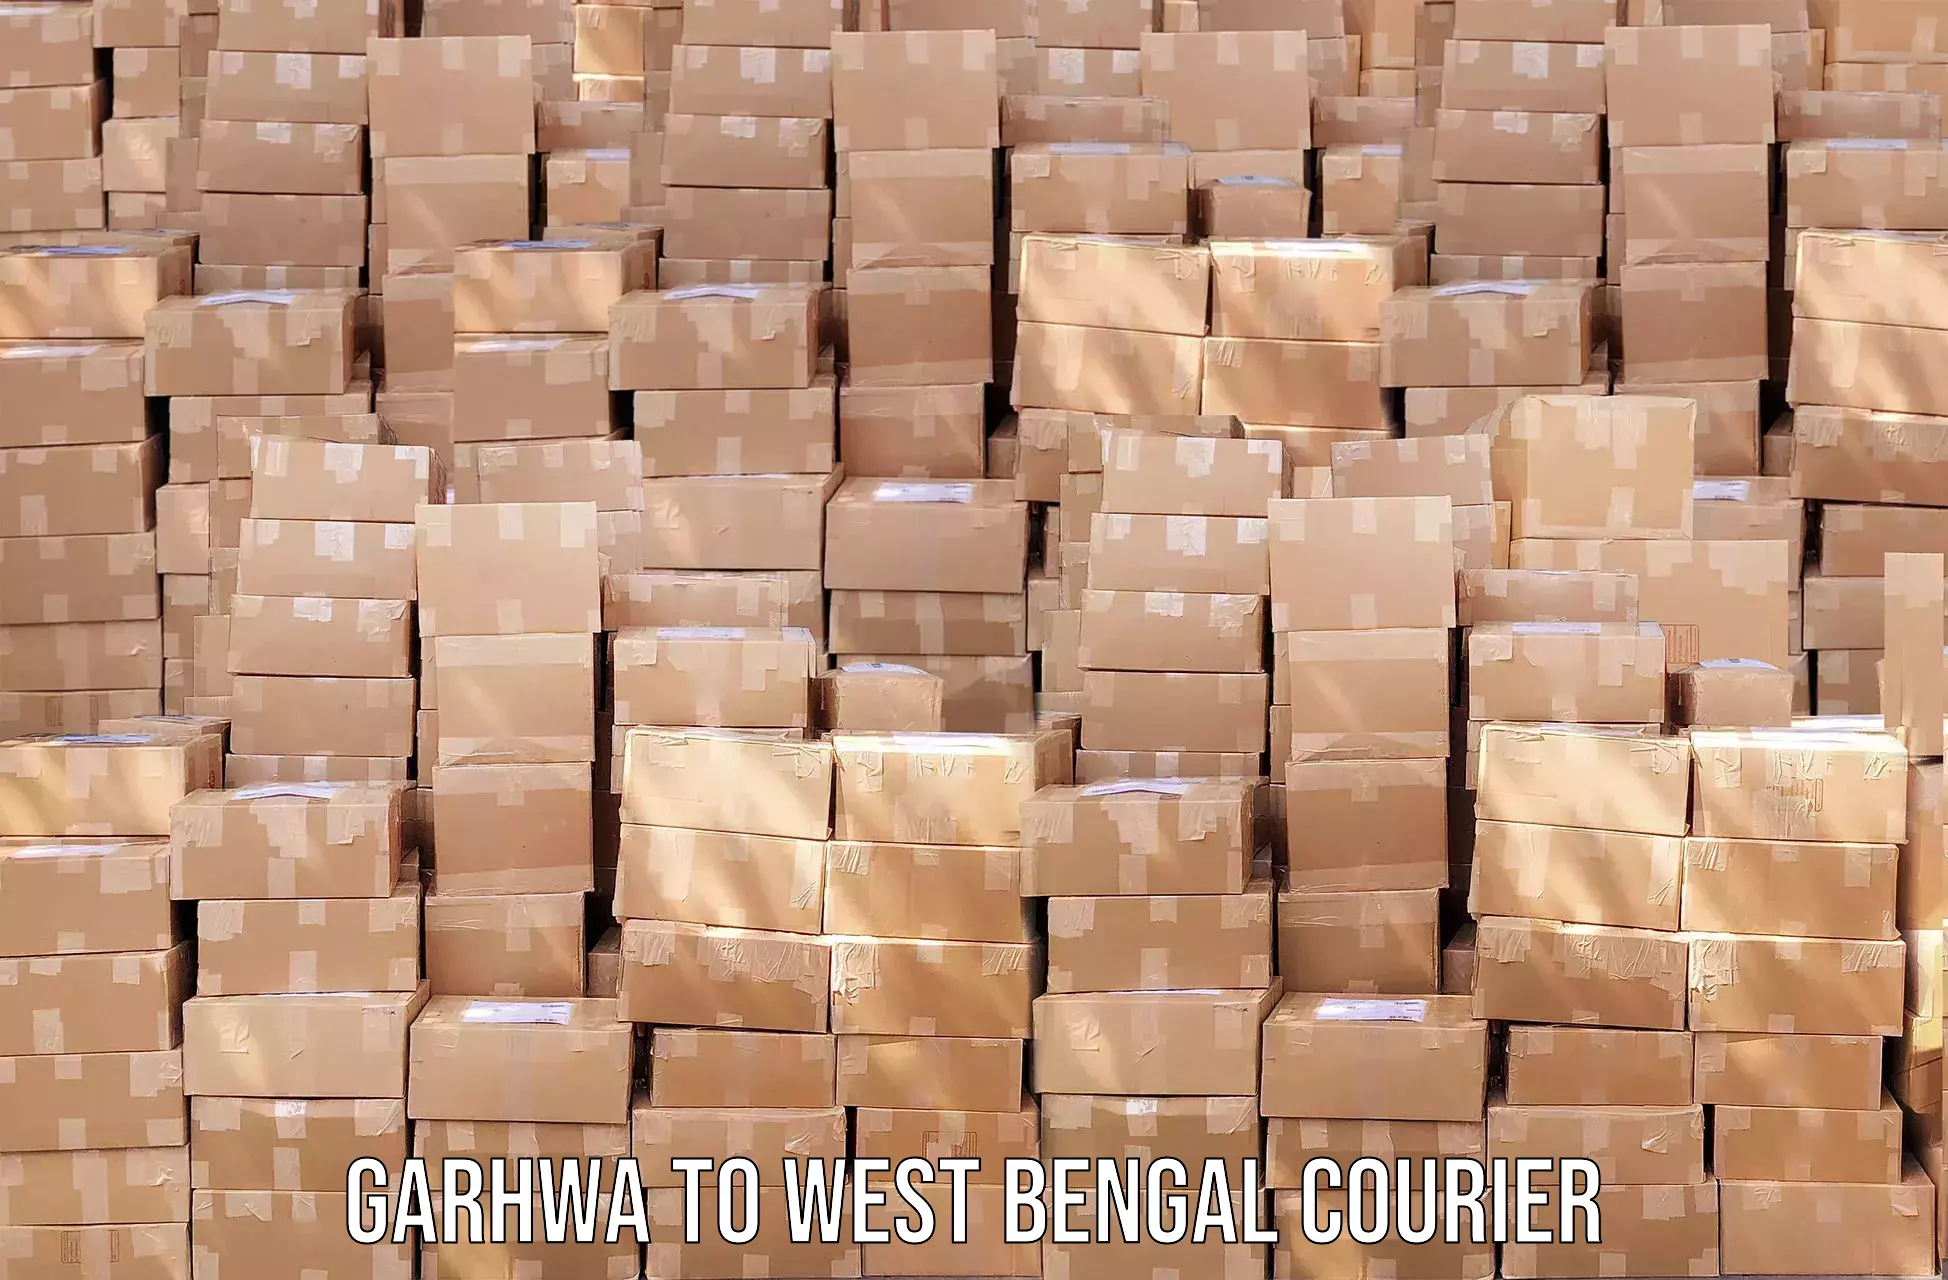 Courier service comparison Garhwa to West Bengal